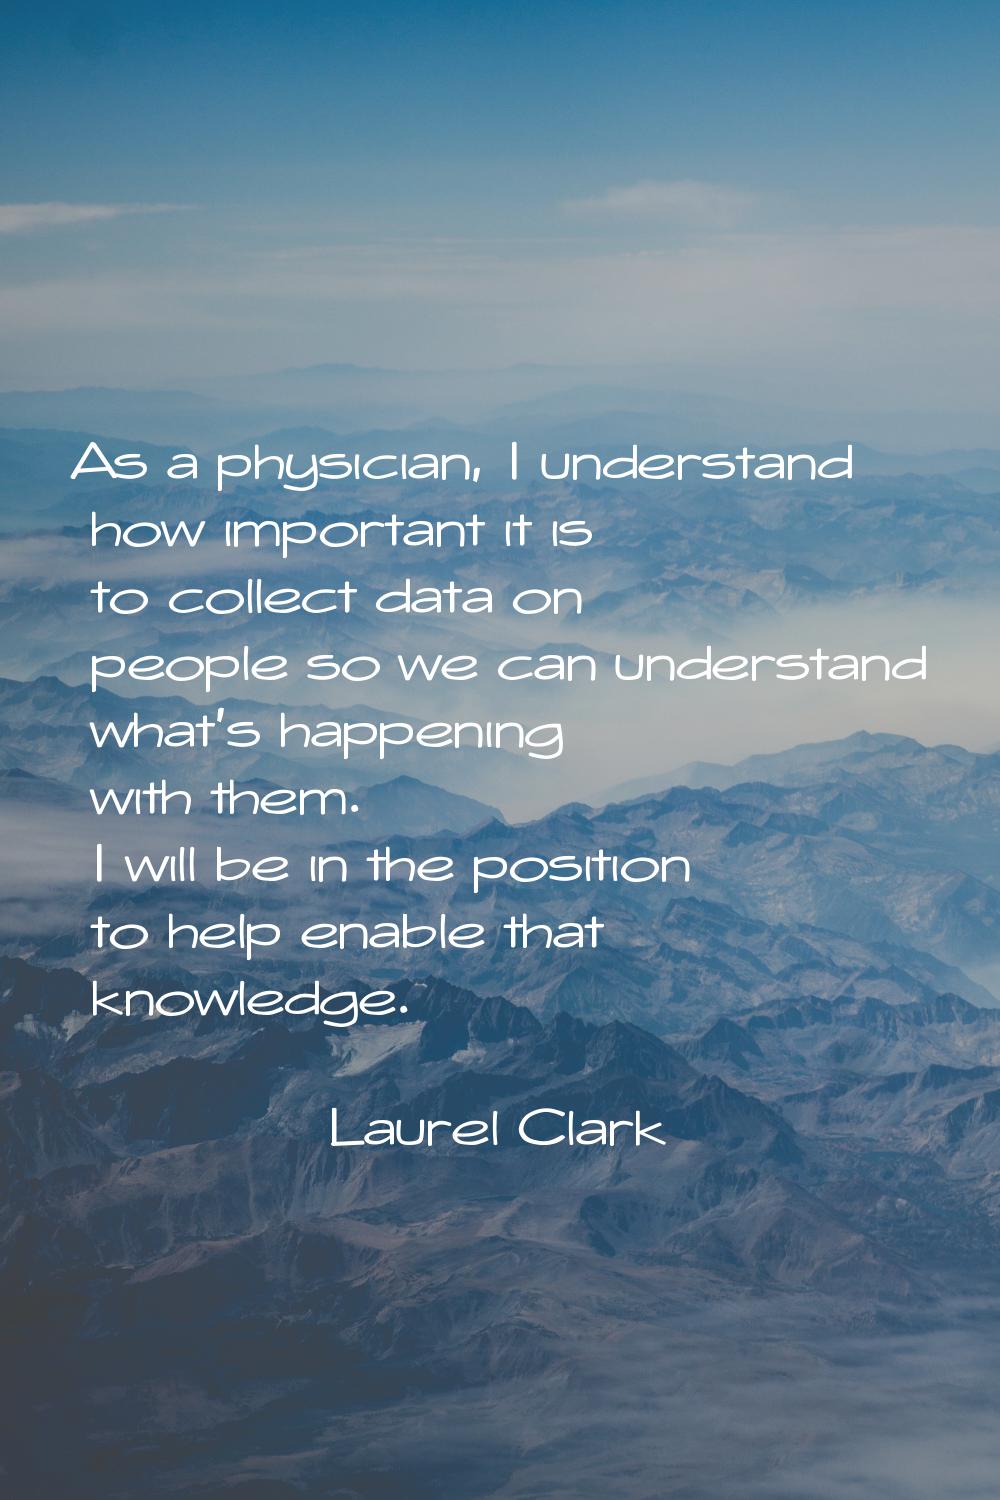 As a physician, I understand how important it is to collect data on people so we can understand wha